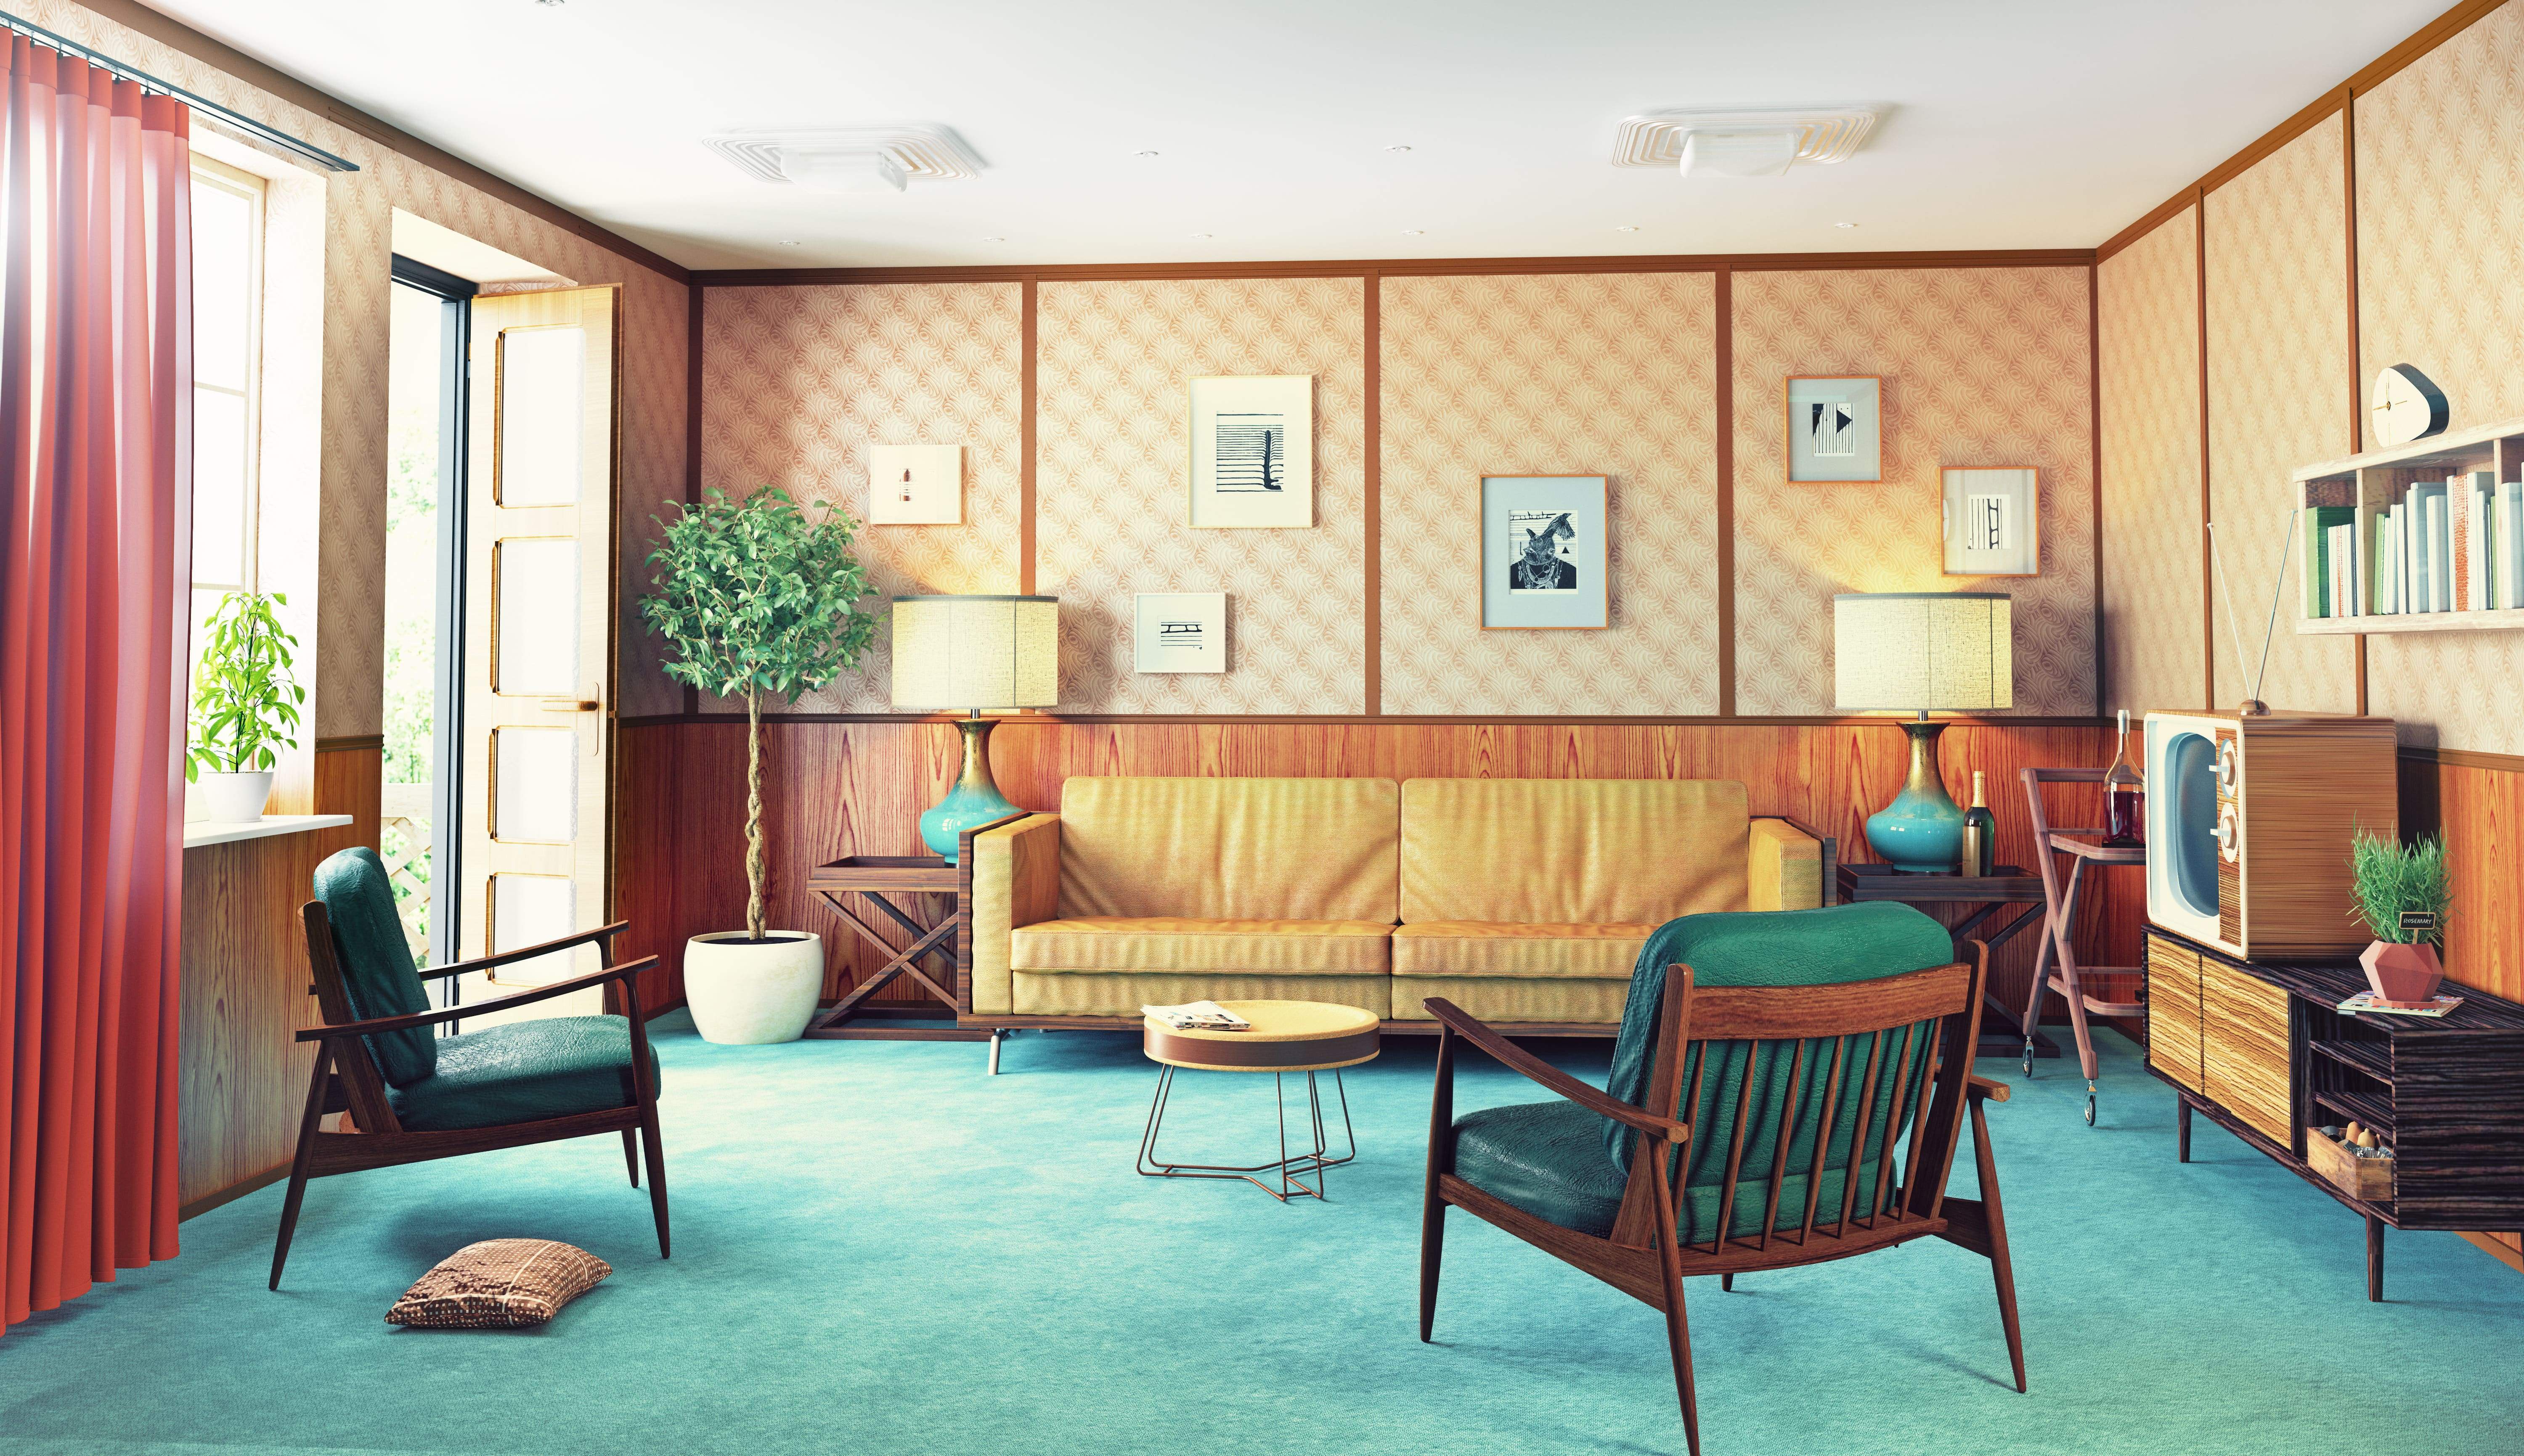 Relaxing Retro-Style: How to Decorate Your Living Room Like the ...